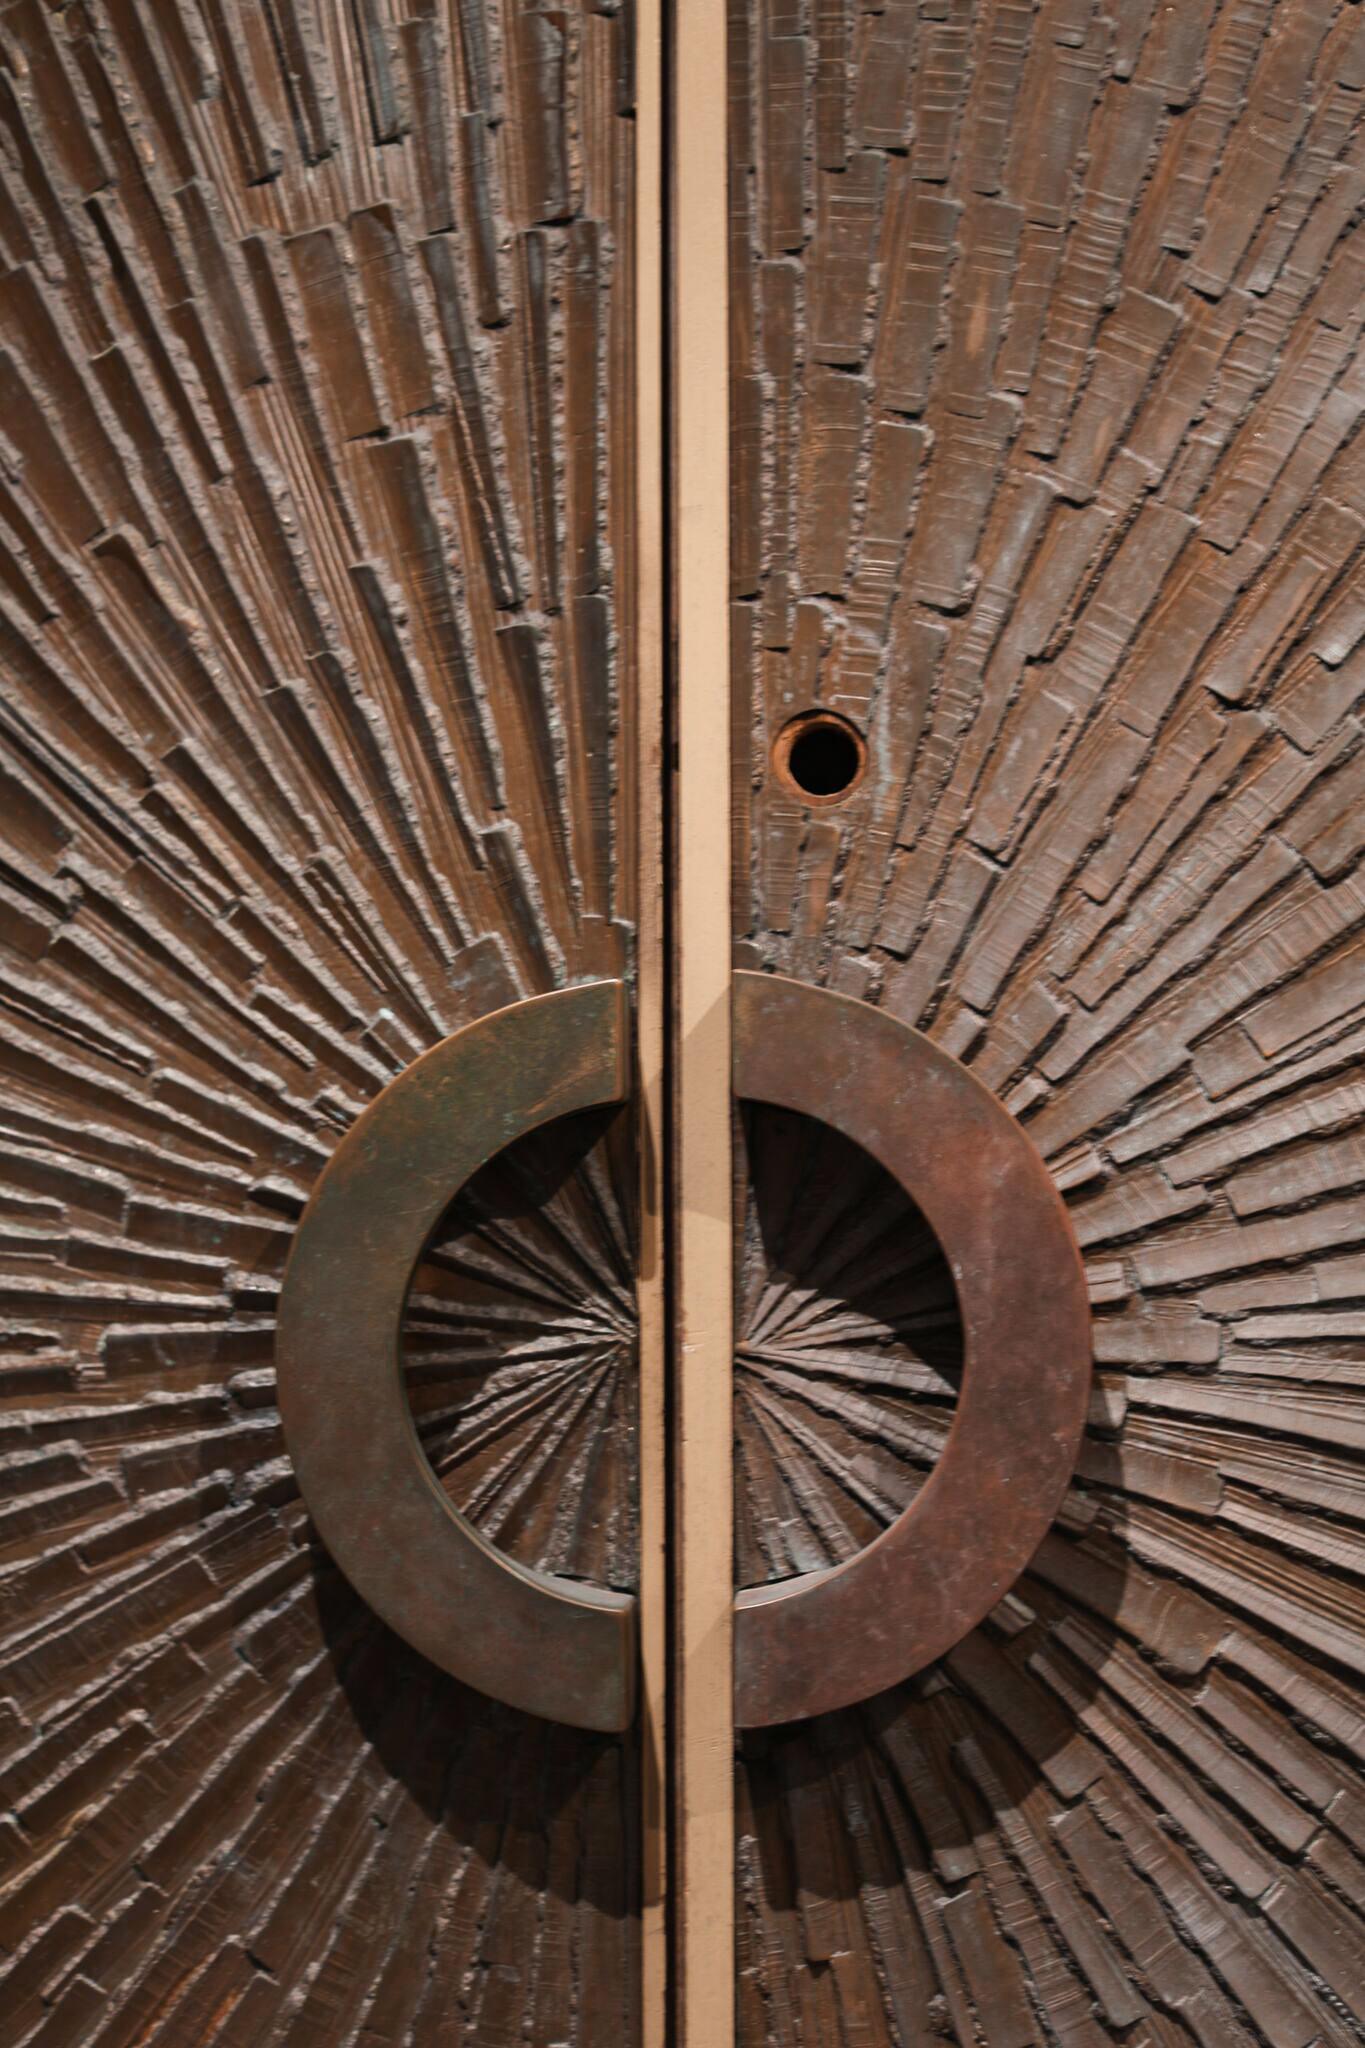 Pair of Heroic sunburst double sided bronze door designed by Billy Joe Mc Carrol and David Gillespie for Forms and Surfaces. Patinated bronze pattern on interior and exterior. Both sides feature original semicircular solid bronze handles. Finish on